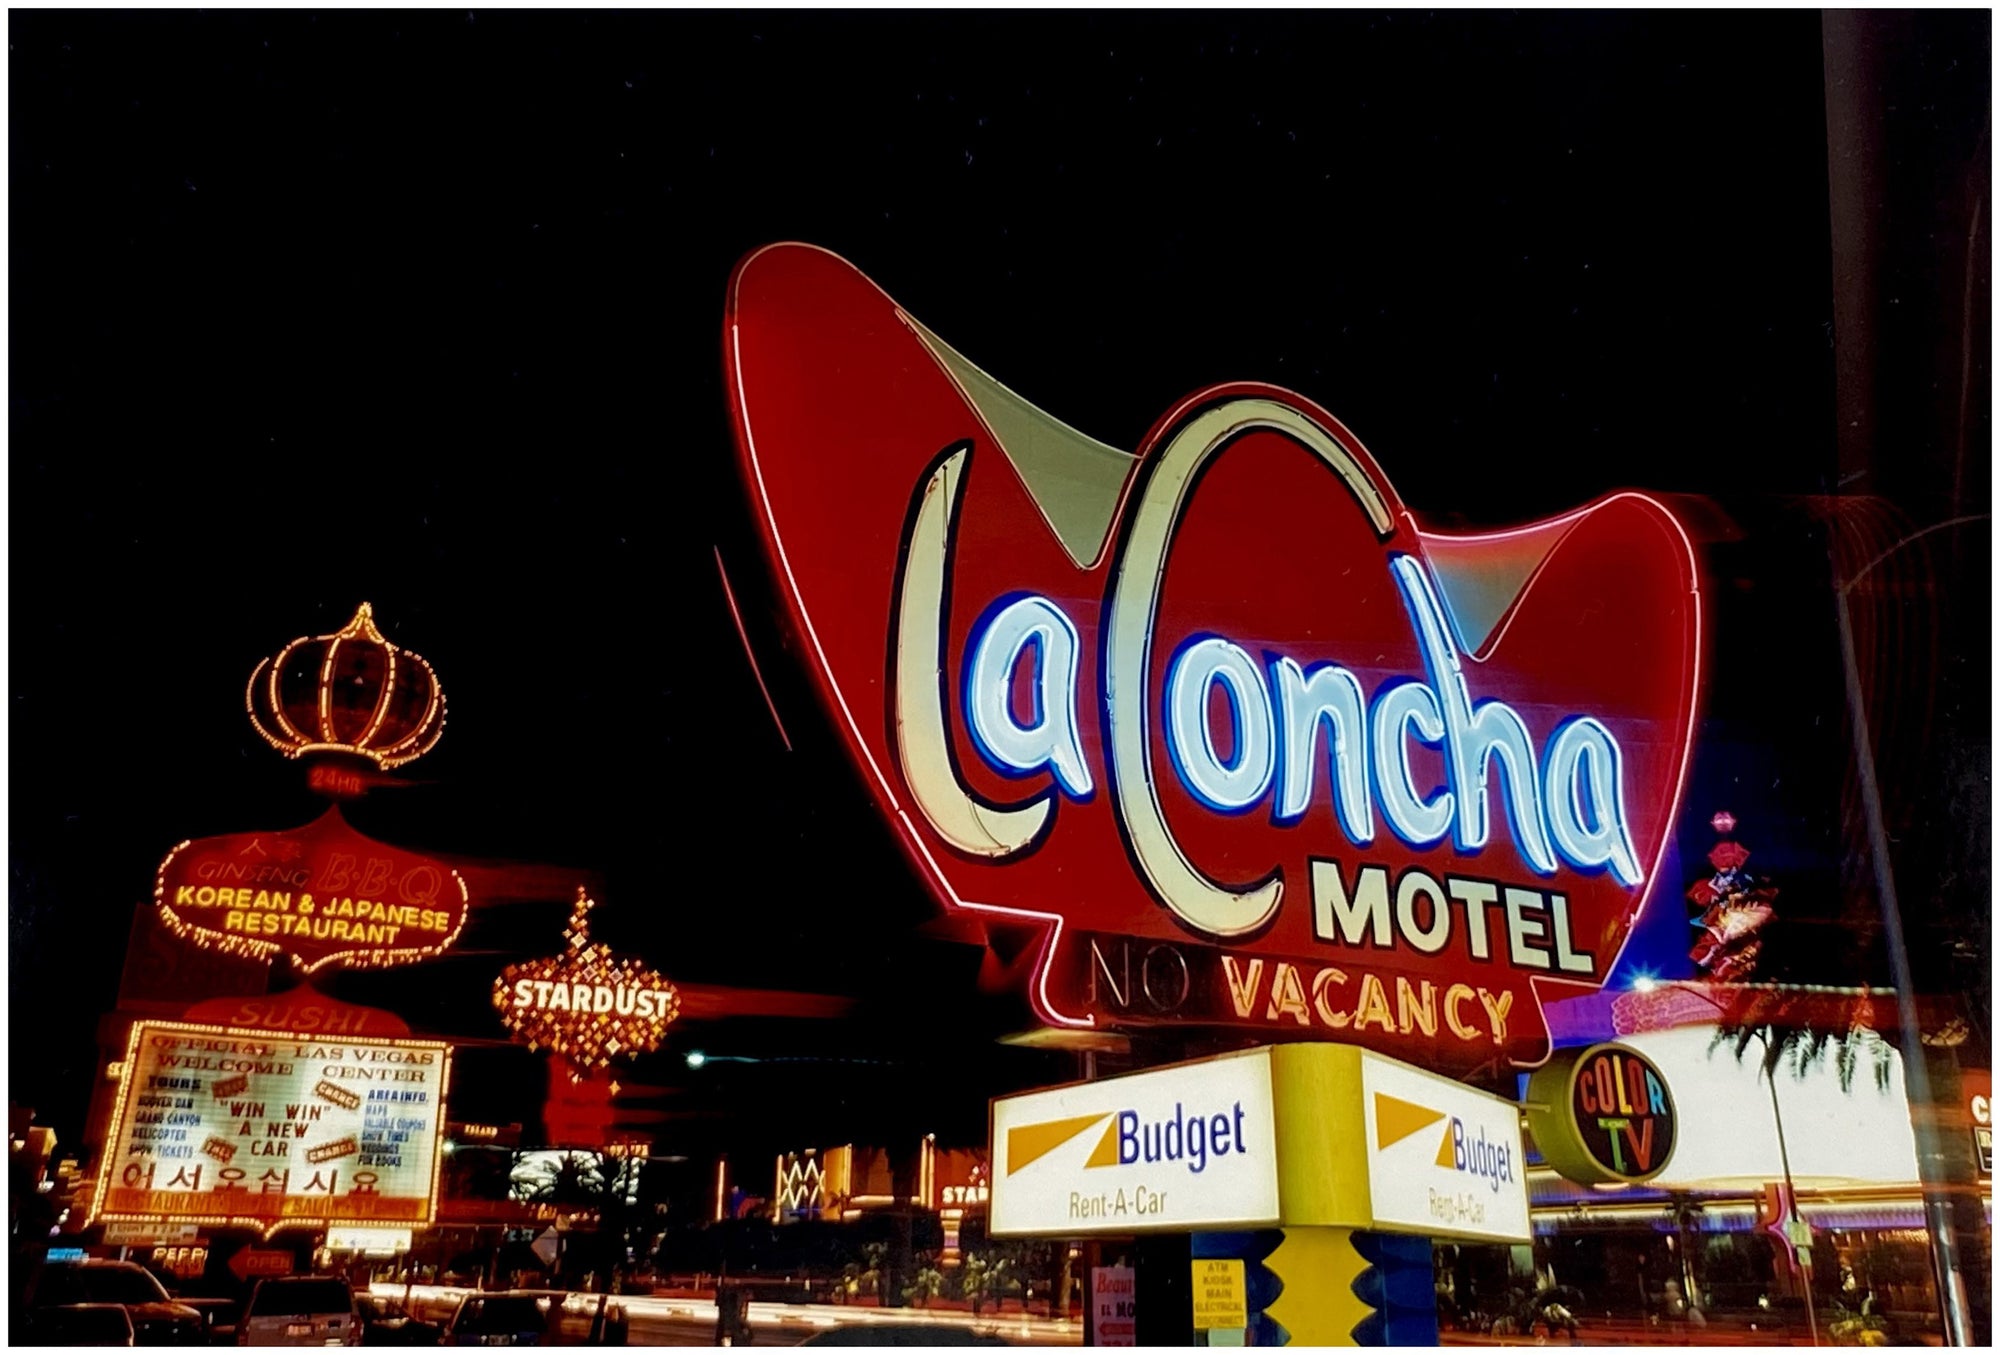 The iconic architecture of the La Concha Motel, captured by Richard Heeps for his 'Dream in Colour' series, before its closure in 2004. Designed by Paul Williams, it is synonymous of the Googie style architecture popular in America during the 1950's and 1960's. The lobby is now preserved at the Las Vegas Neon Museum.